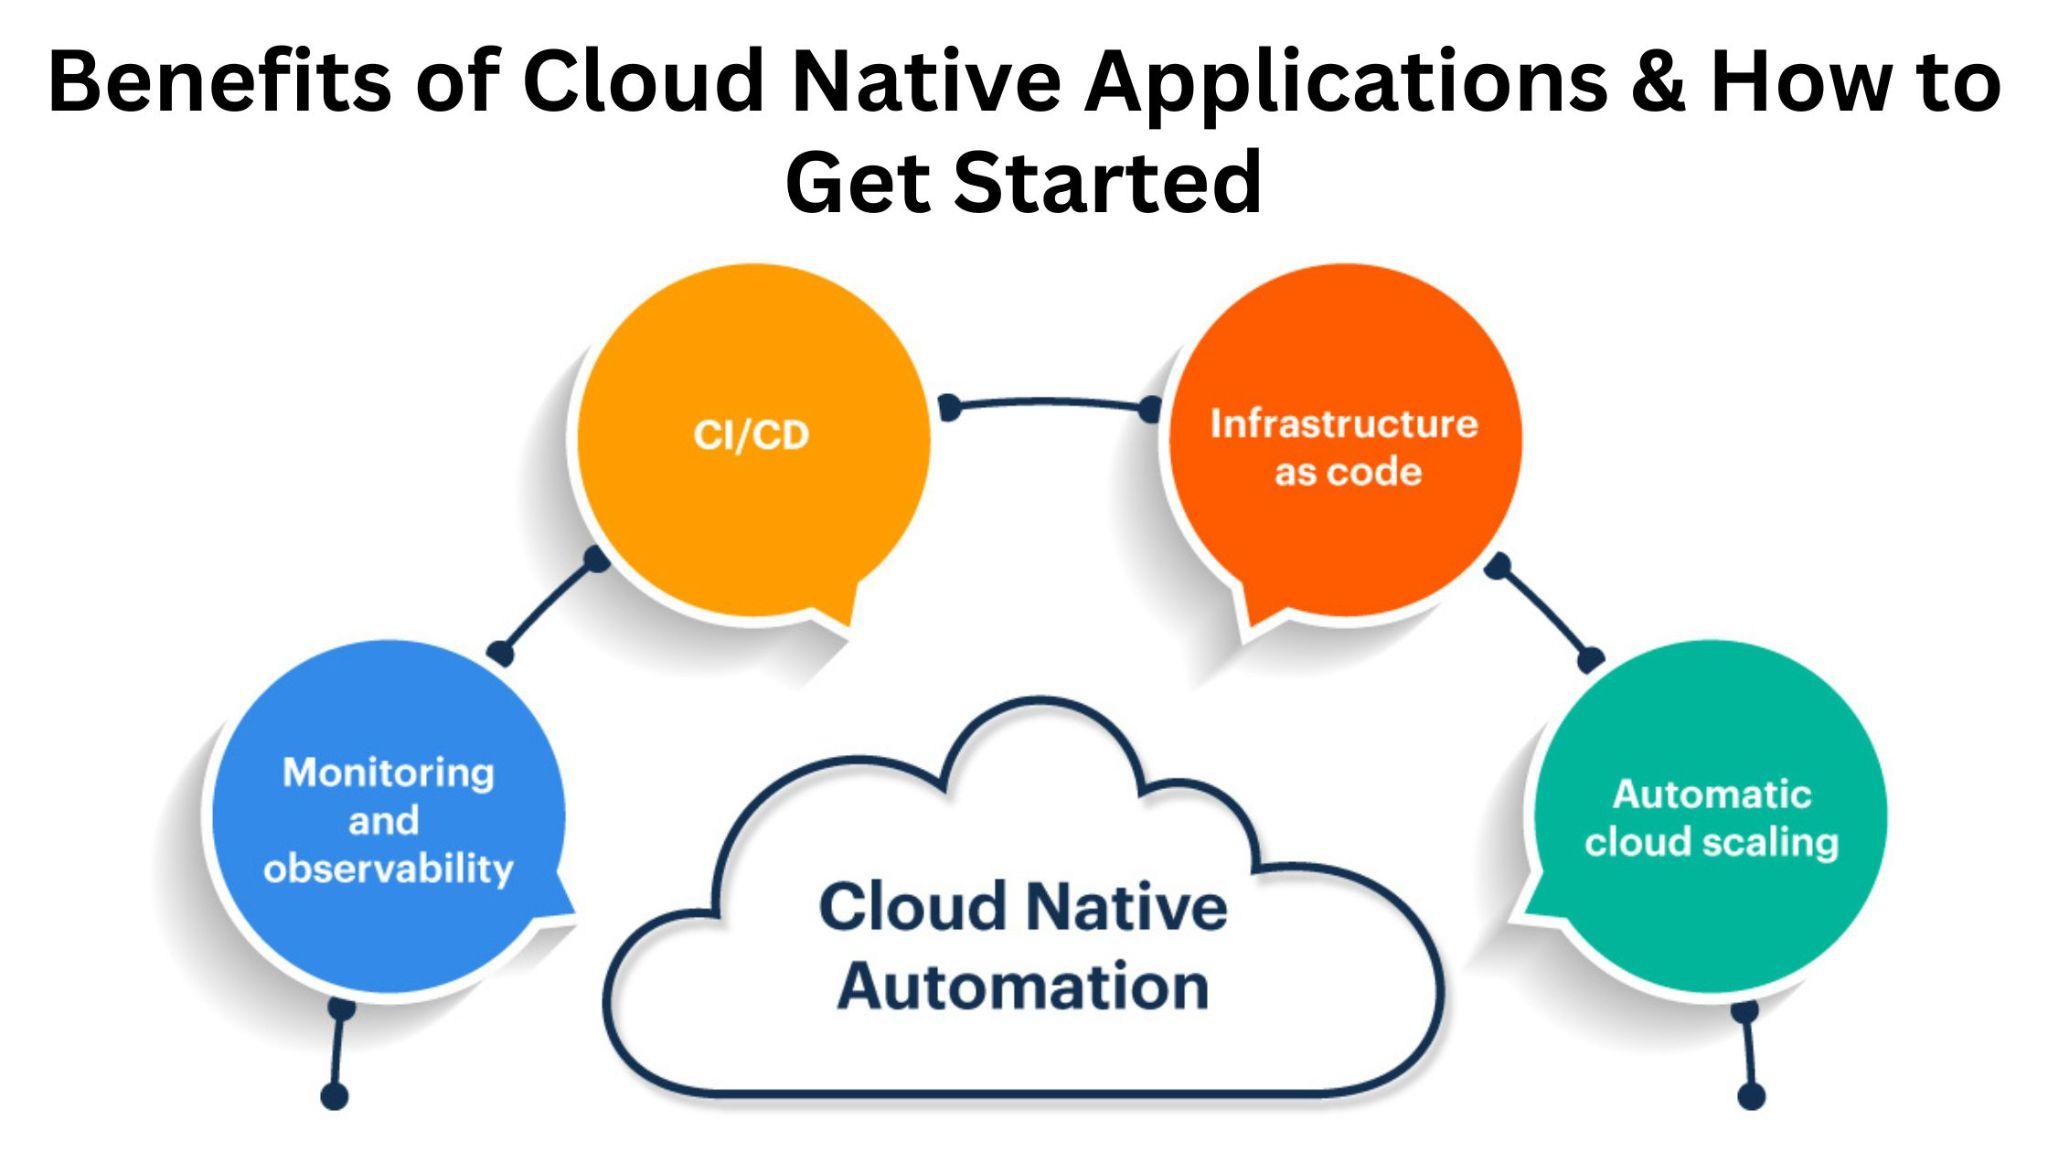 Benefits of Cloud Native App & How to Get Started